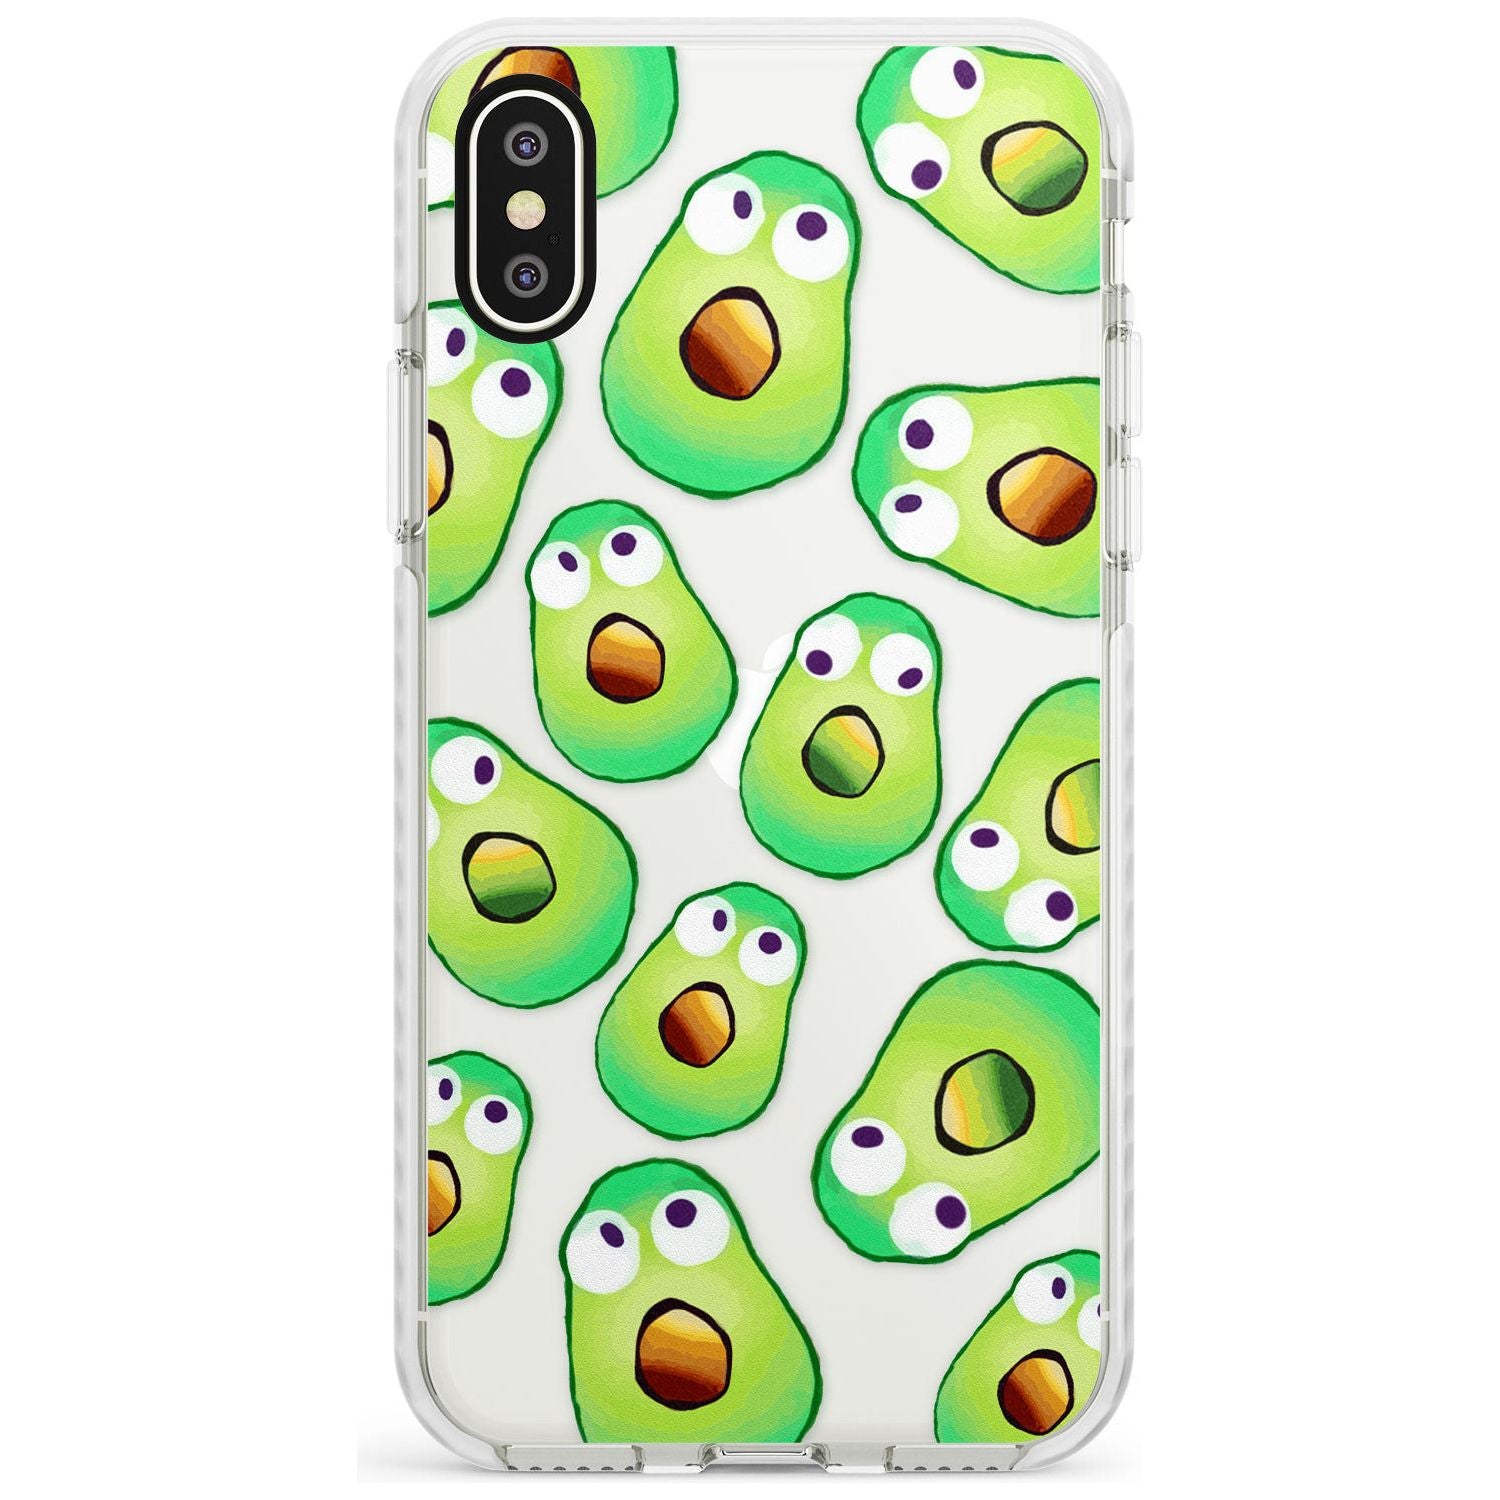 Shocked Avocados Impact Phone Case for iPhone X XS Max XR